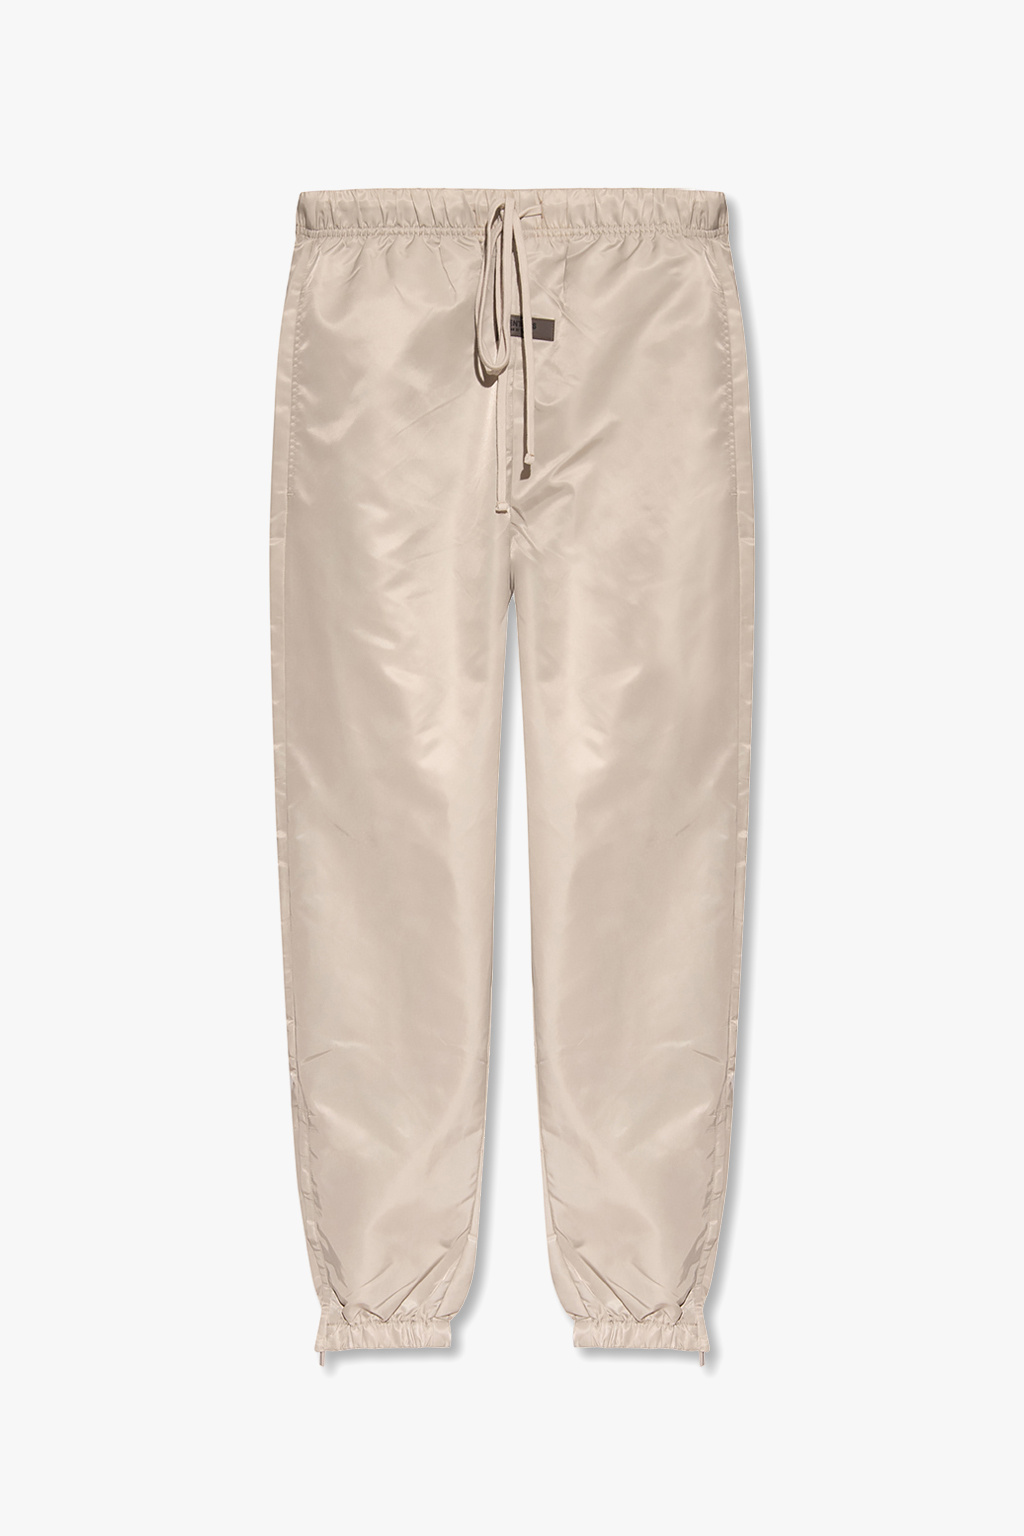 Fear Of God Essentials Track pants with logo | Men's Clothing | Vitkac